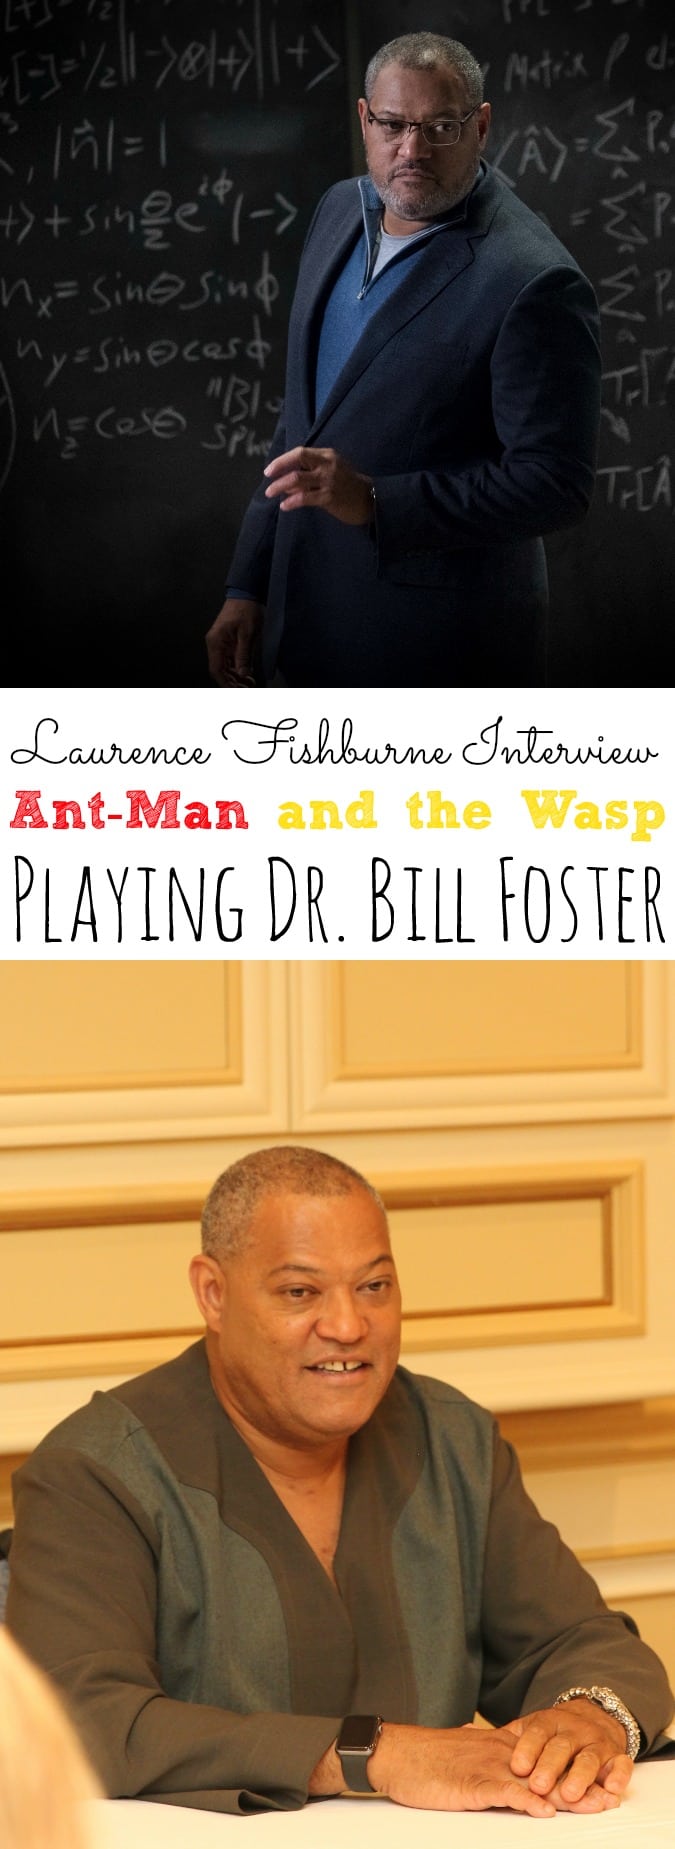 Laurence Fishburne Interview Ant-Man and the Wasp